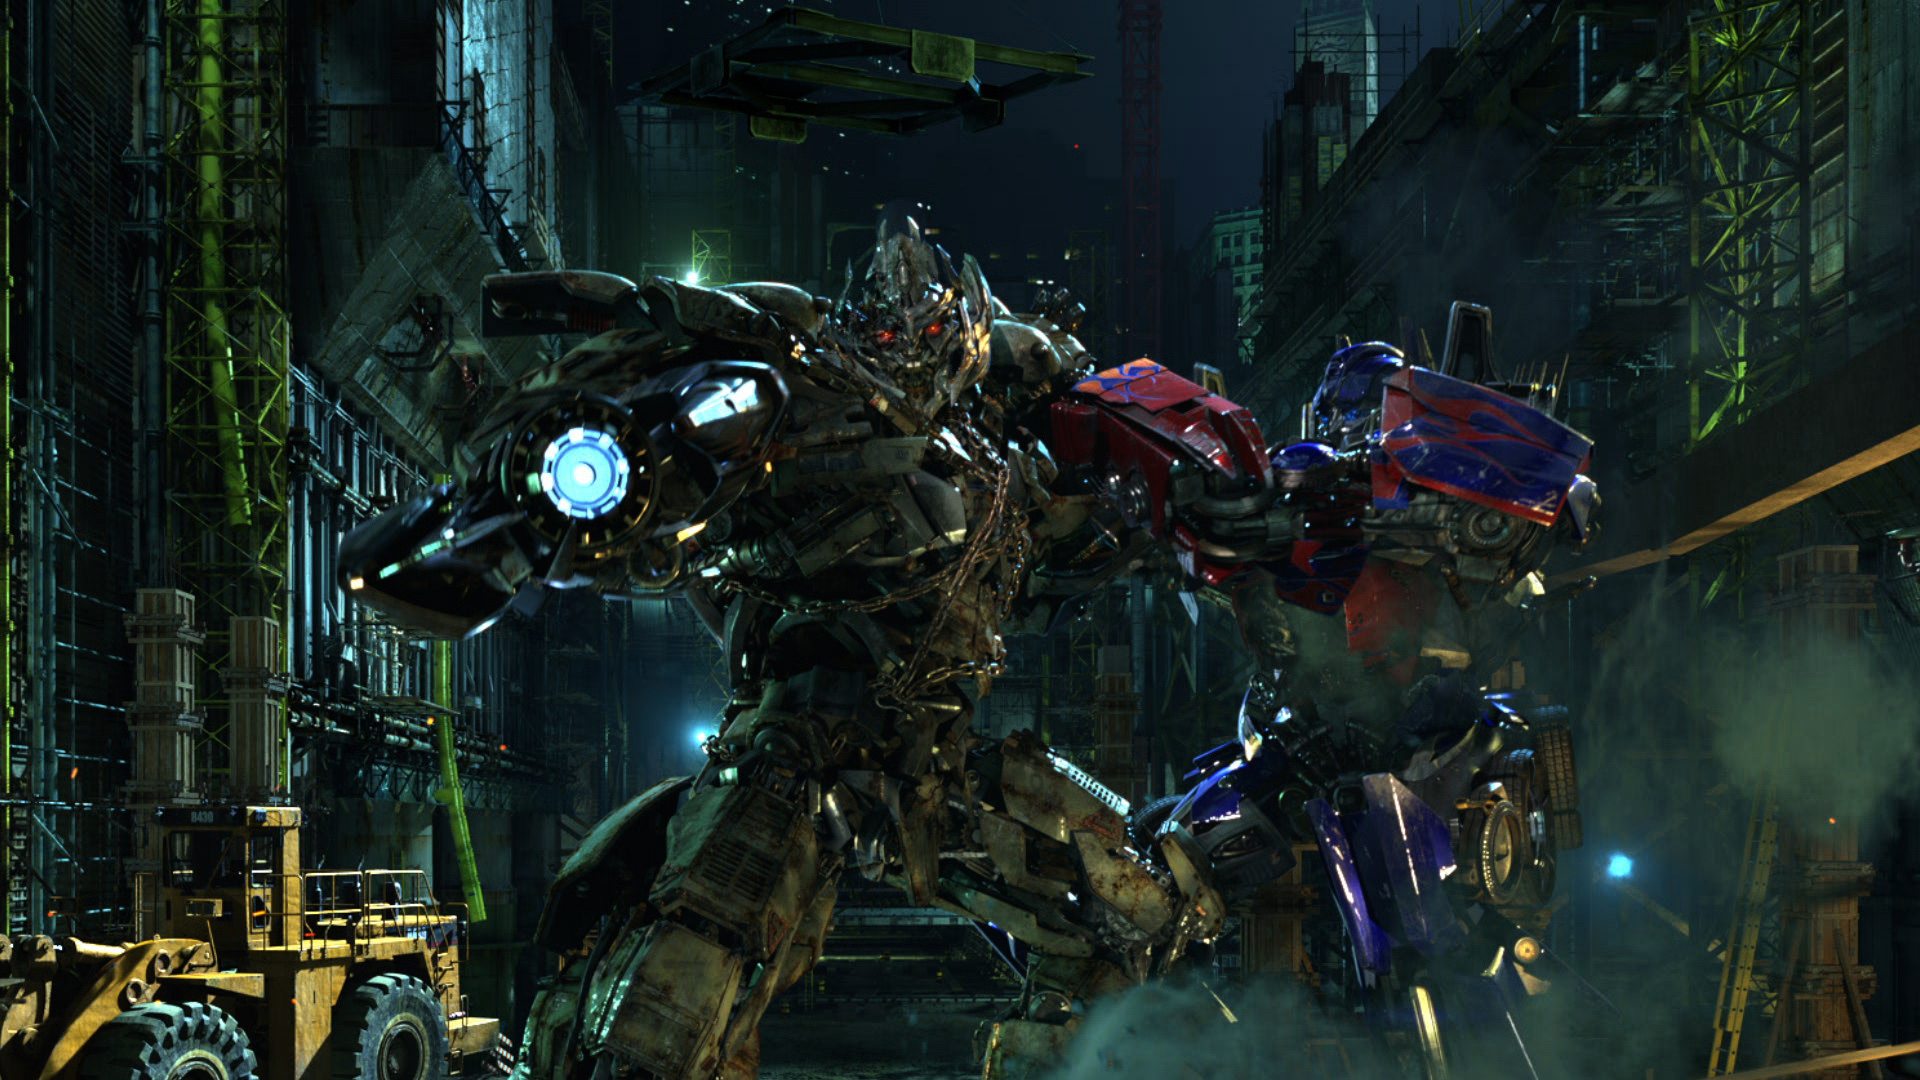 Optimus Prime and Megatron battle it out  Image courtesy of Unviersal Orlando